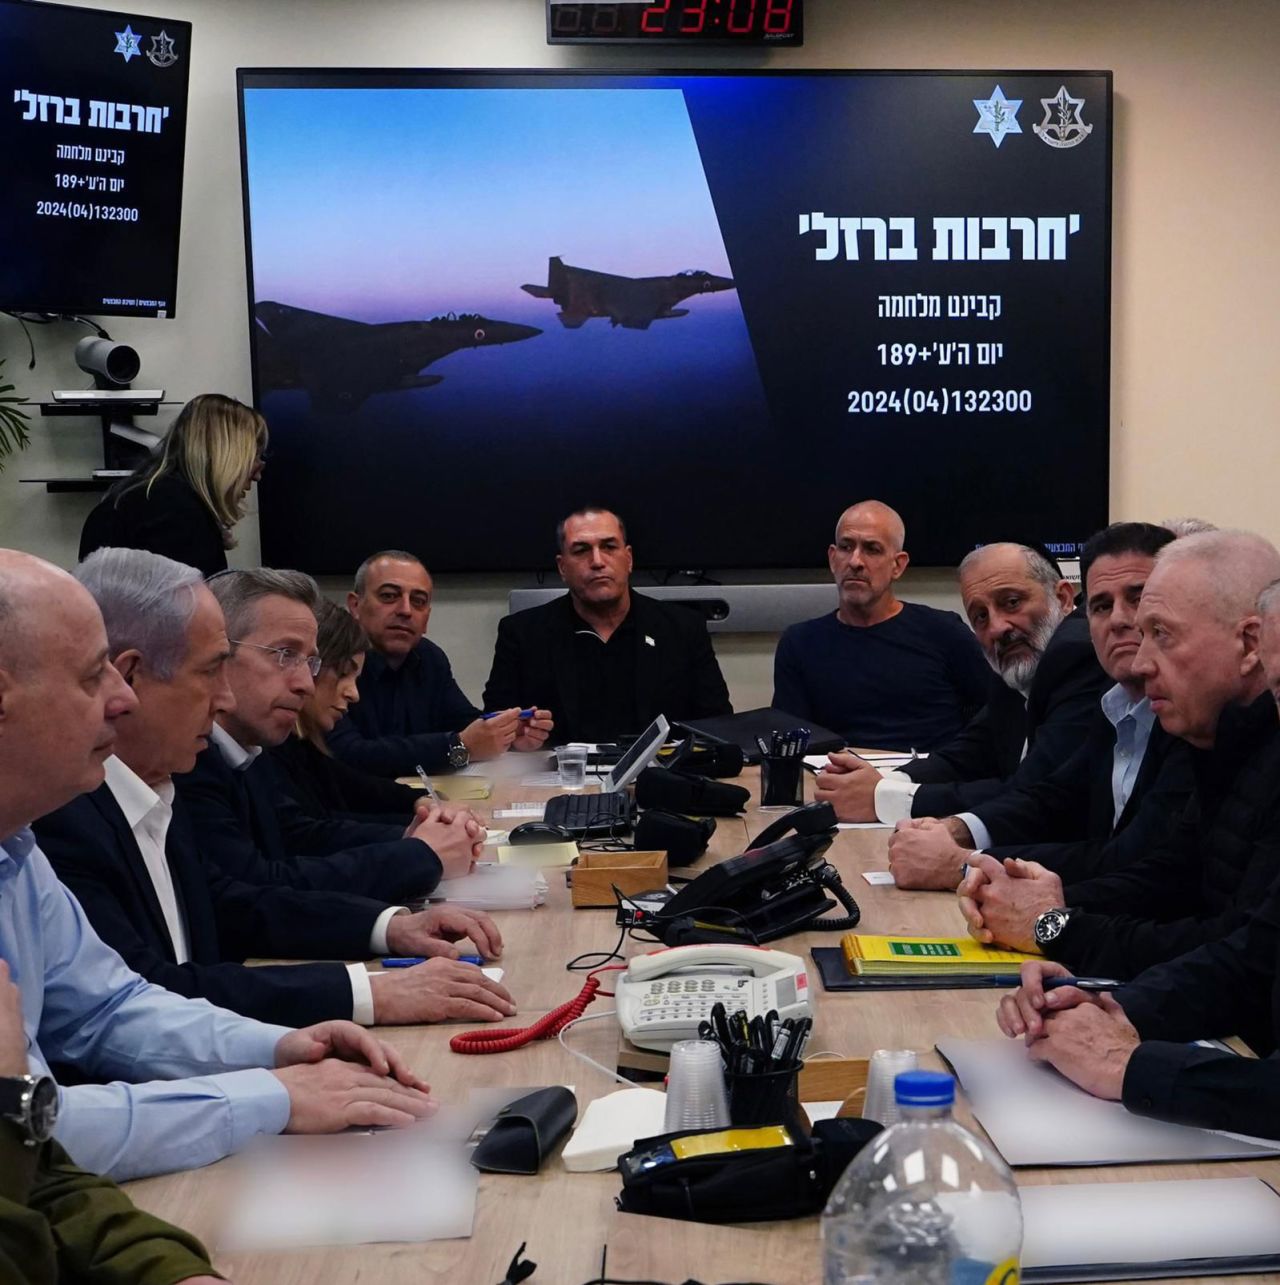 This handout photo, released early Sunday local time, shows Israeli Prime Minister Benjamin Netanyahu, second from left, as he meets with members of his war cabinet at the Ministry of Defense in Tel Aviv, Israel. Portions of this photo have been blurred by the source. 